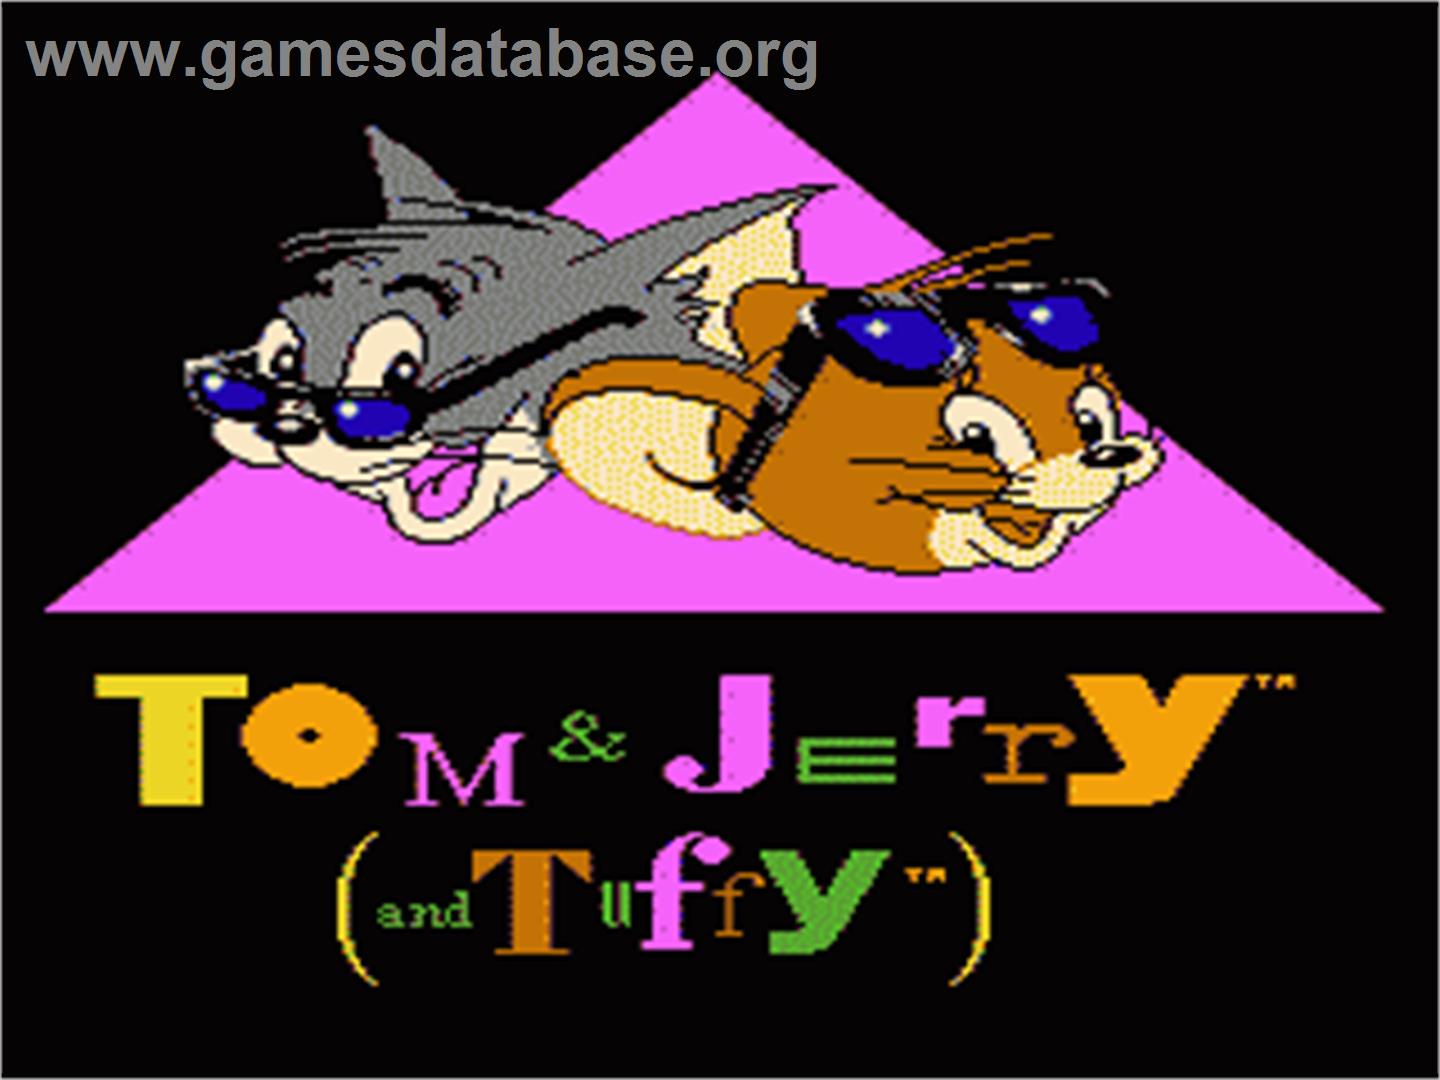 Tom & Jerry: The Ultimate Game of Cat and Mouse - Nintendo NES - Artwork - Title Screen